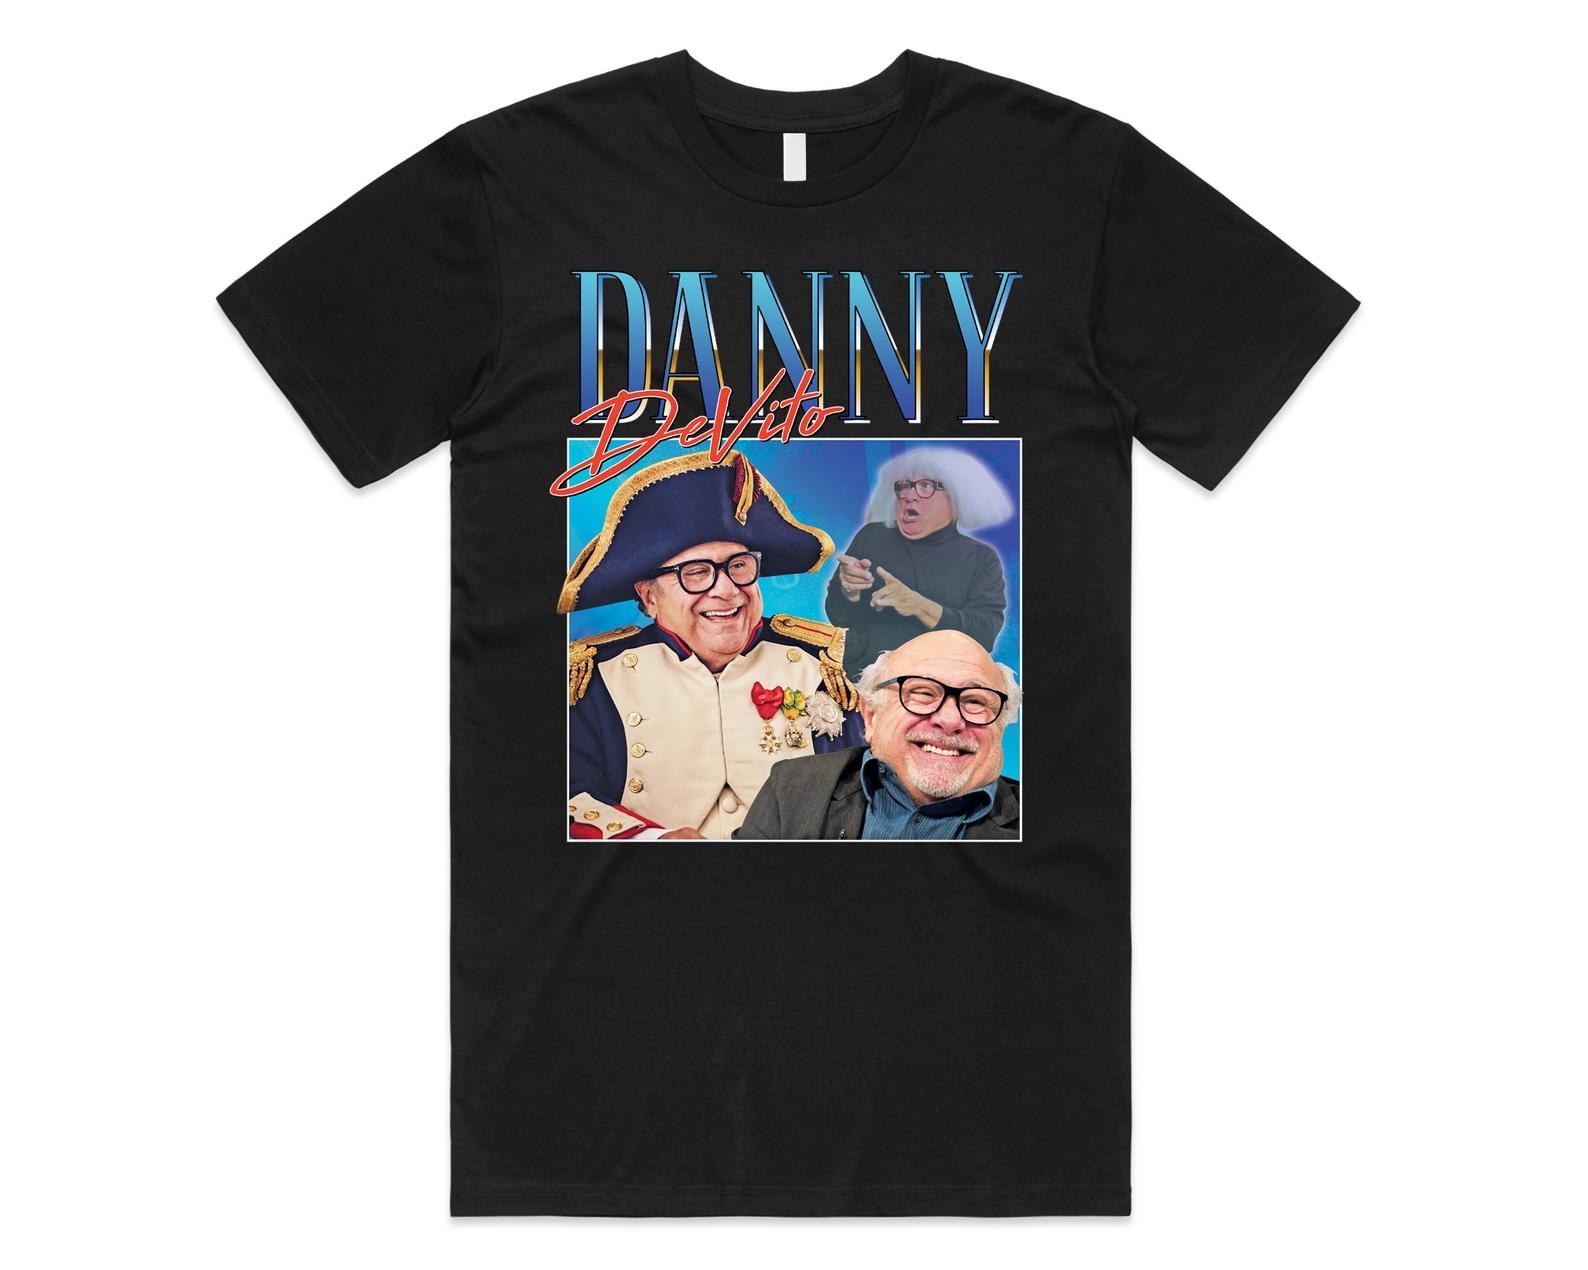 Black t-shirt with an old-school design with pictures of actor Danny DeVito and his name above it